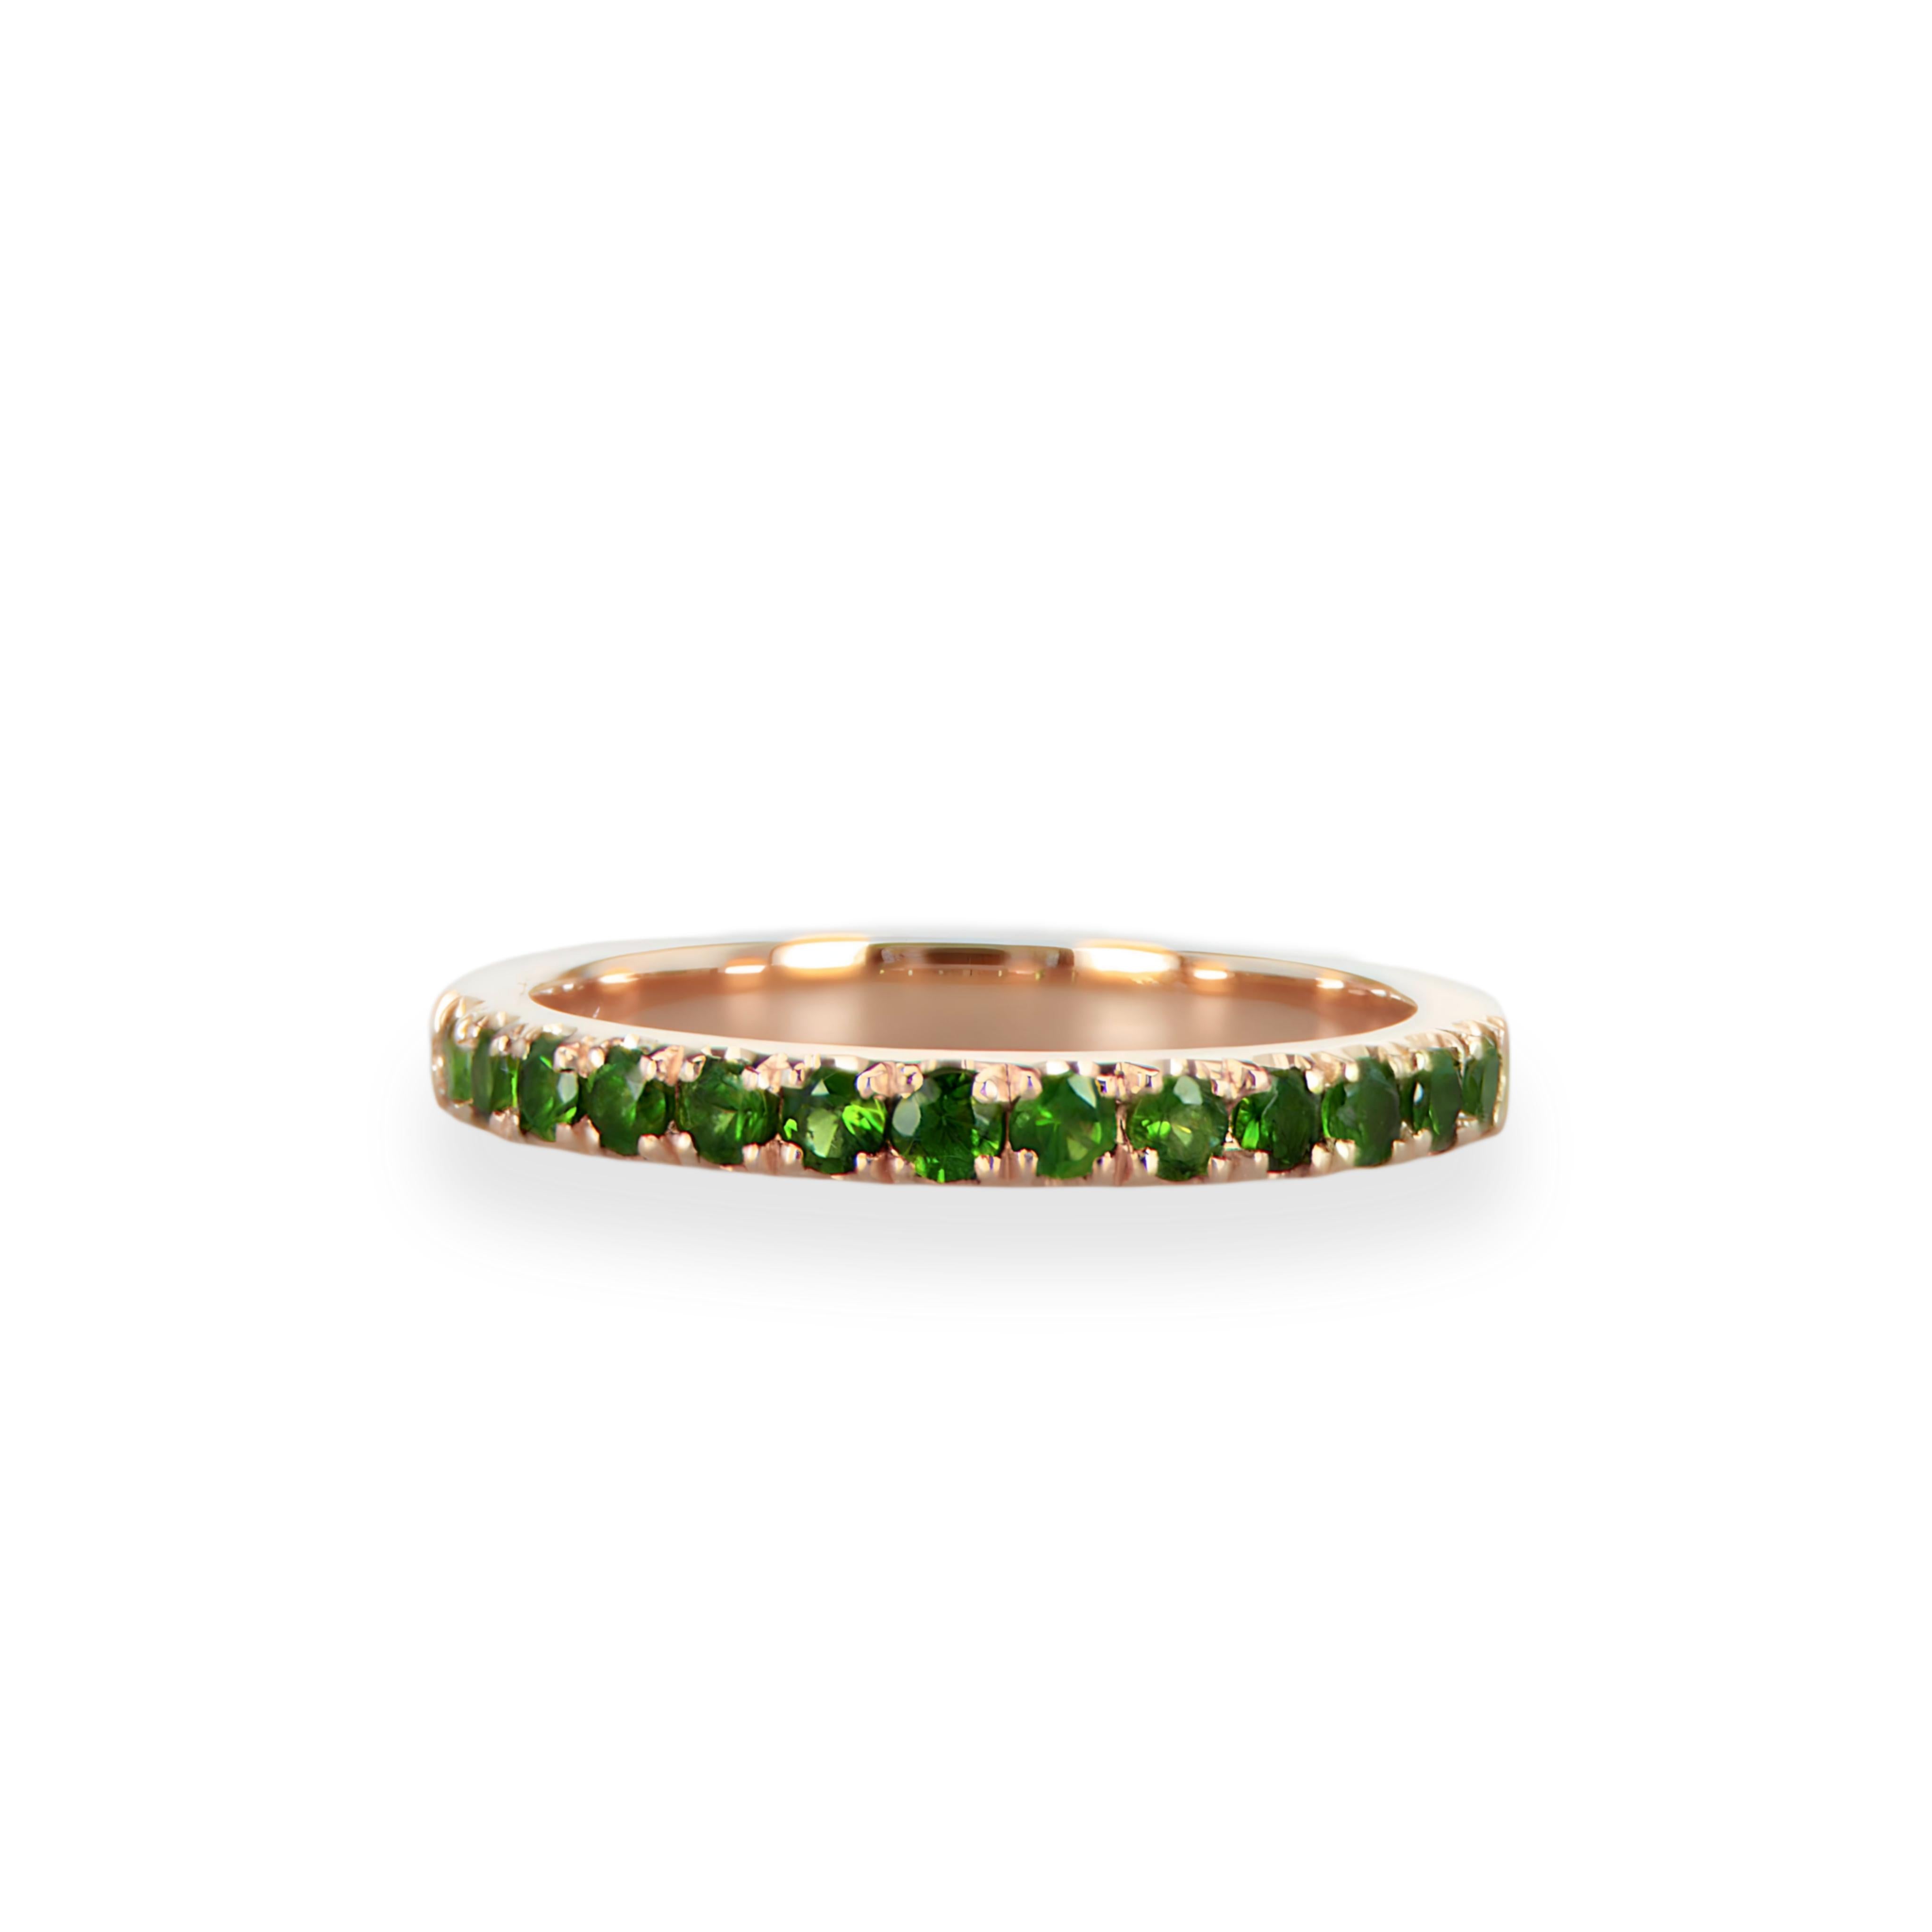 14K Rose Gold 0.54Ct Natural Round Tsavorite Half Eternity Radiance Ring

Product Description:

Indulge in the symphony of luxury and rarity with our exquisite 0.54Ct Natural Round Tsavorite Half Eternity Ring, meticulously crafted in premium 14K